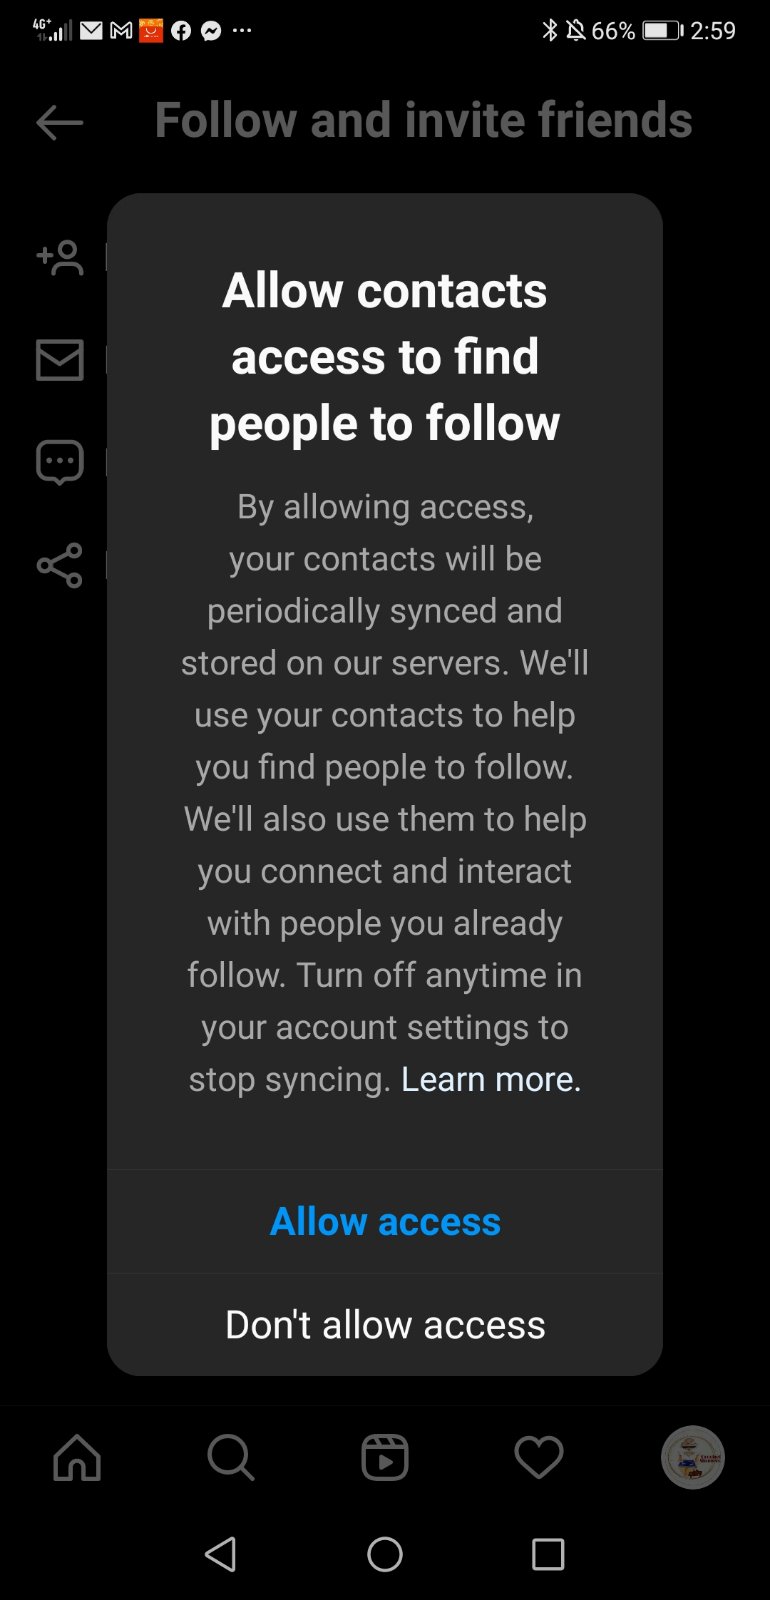 Allow access to contacts